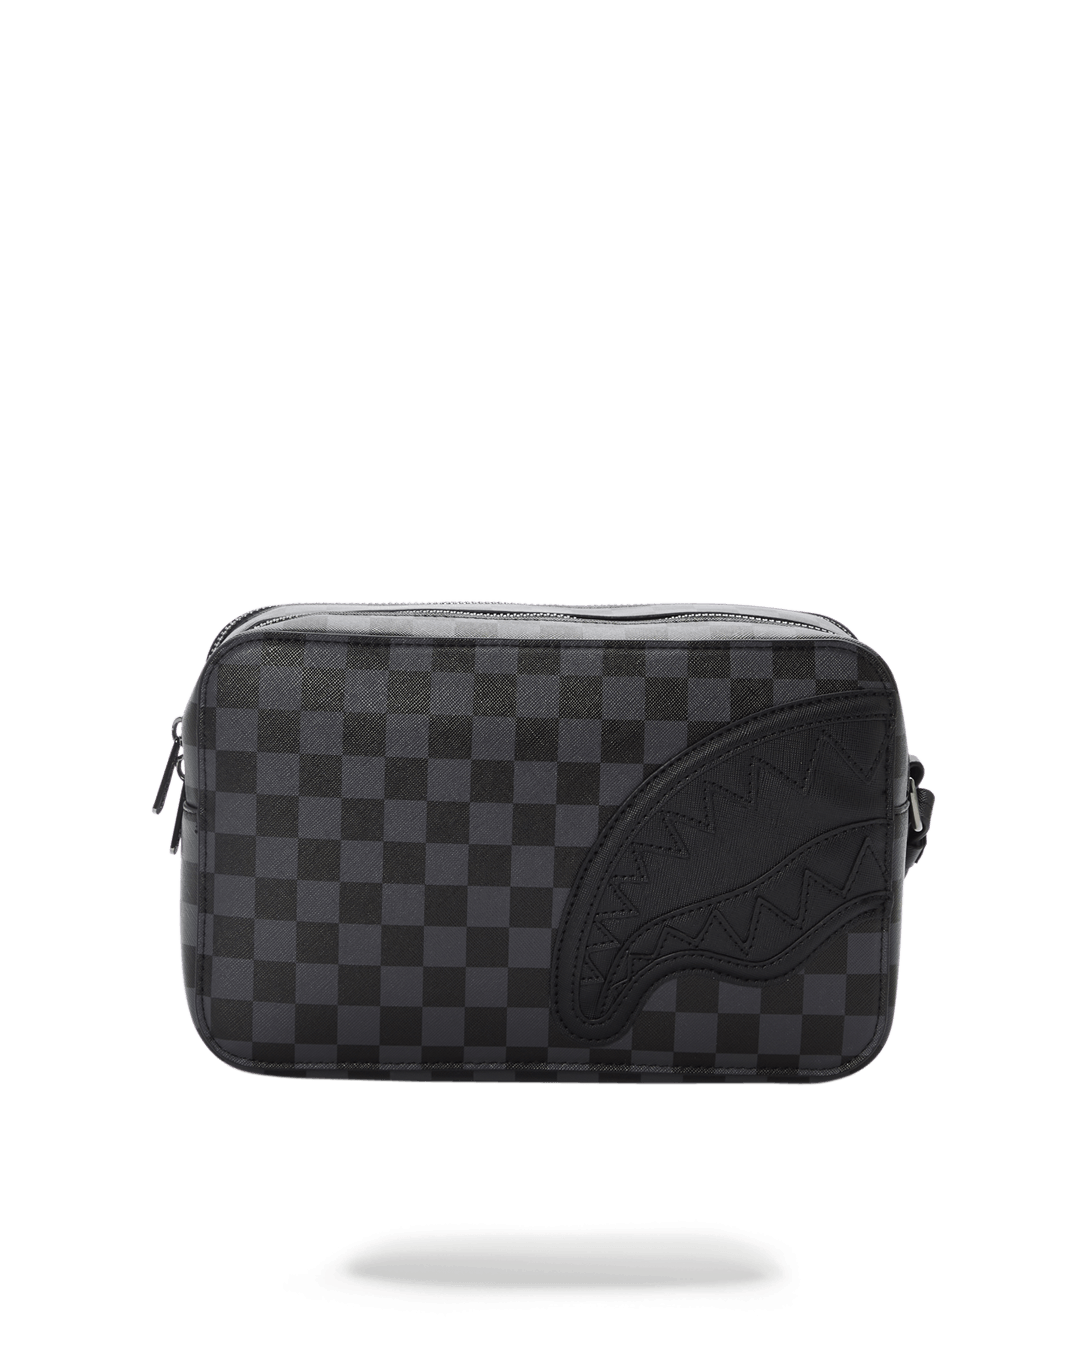 HENNY BLACK TOILETRY BAG - HIGH QUALITY AND INEXPENSIVE - HENNY BLACK TOILETRY BAG HIGH QUALITY AND INEXPENSIVE-01-4